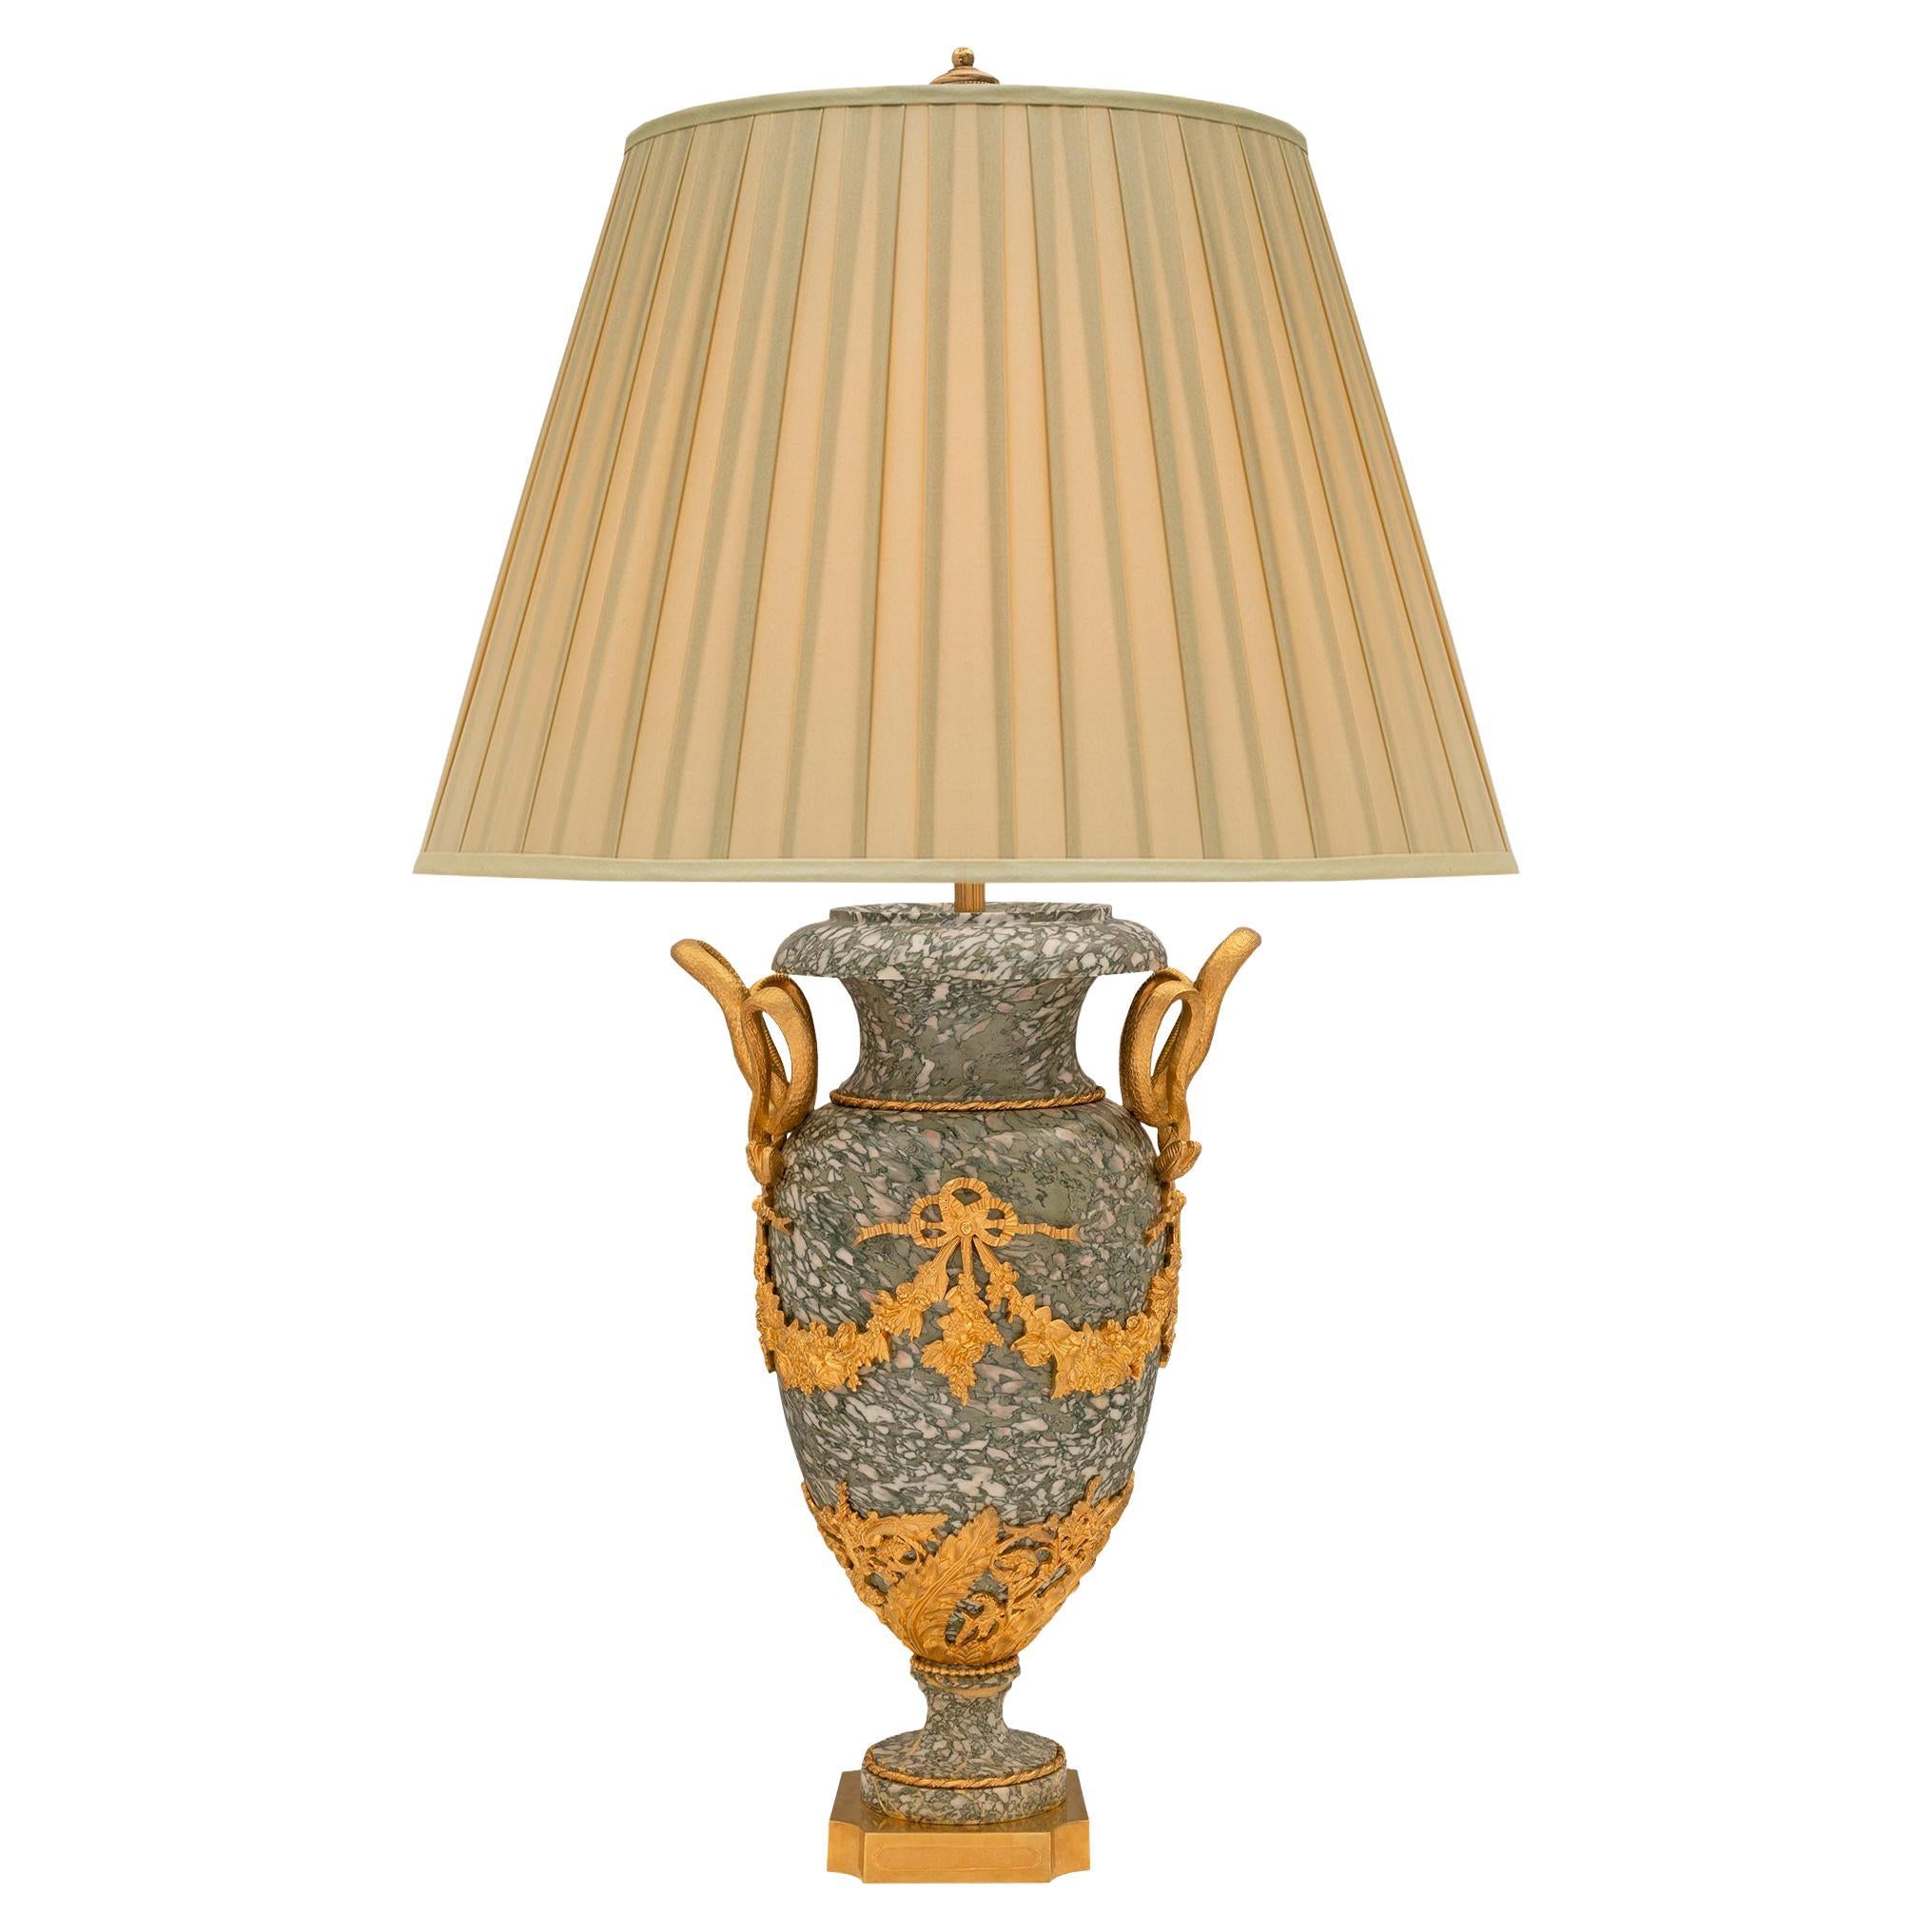 French 19th Century Louis XVI Style Vert Campan Marble and Ormolu Lamp